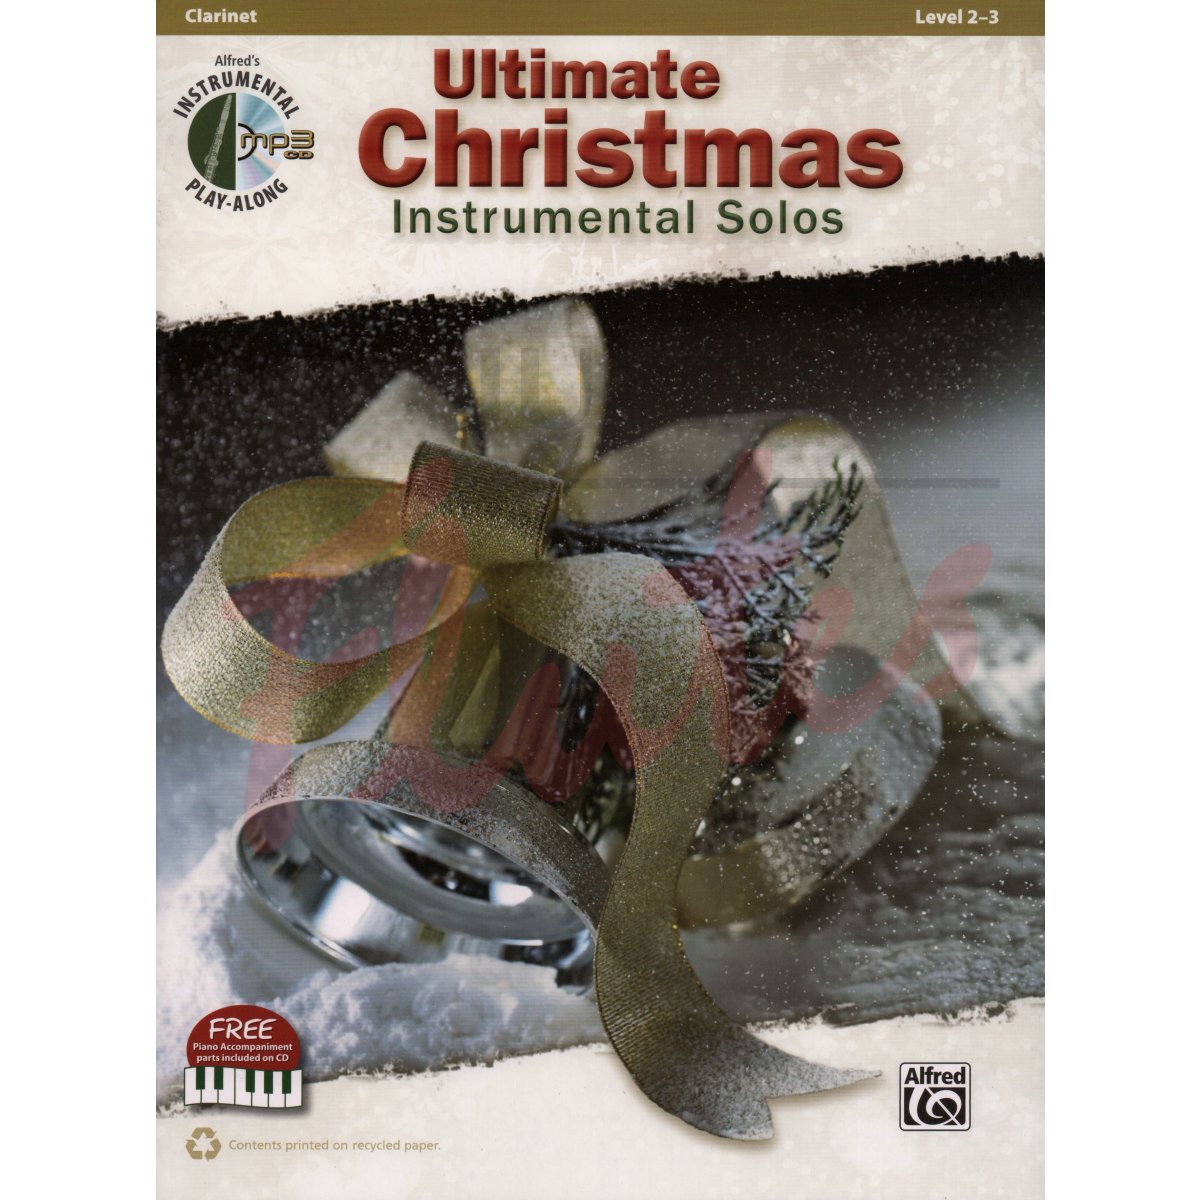 Ultimate Christmas Instrumental Solos for Clarinet